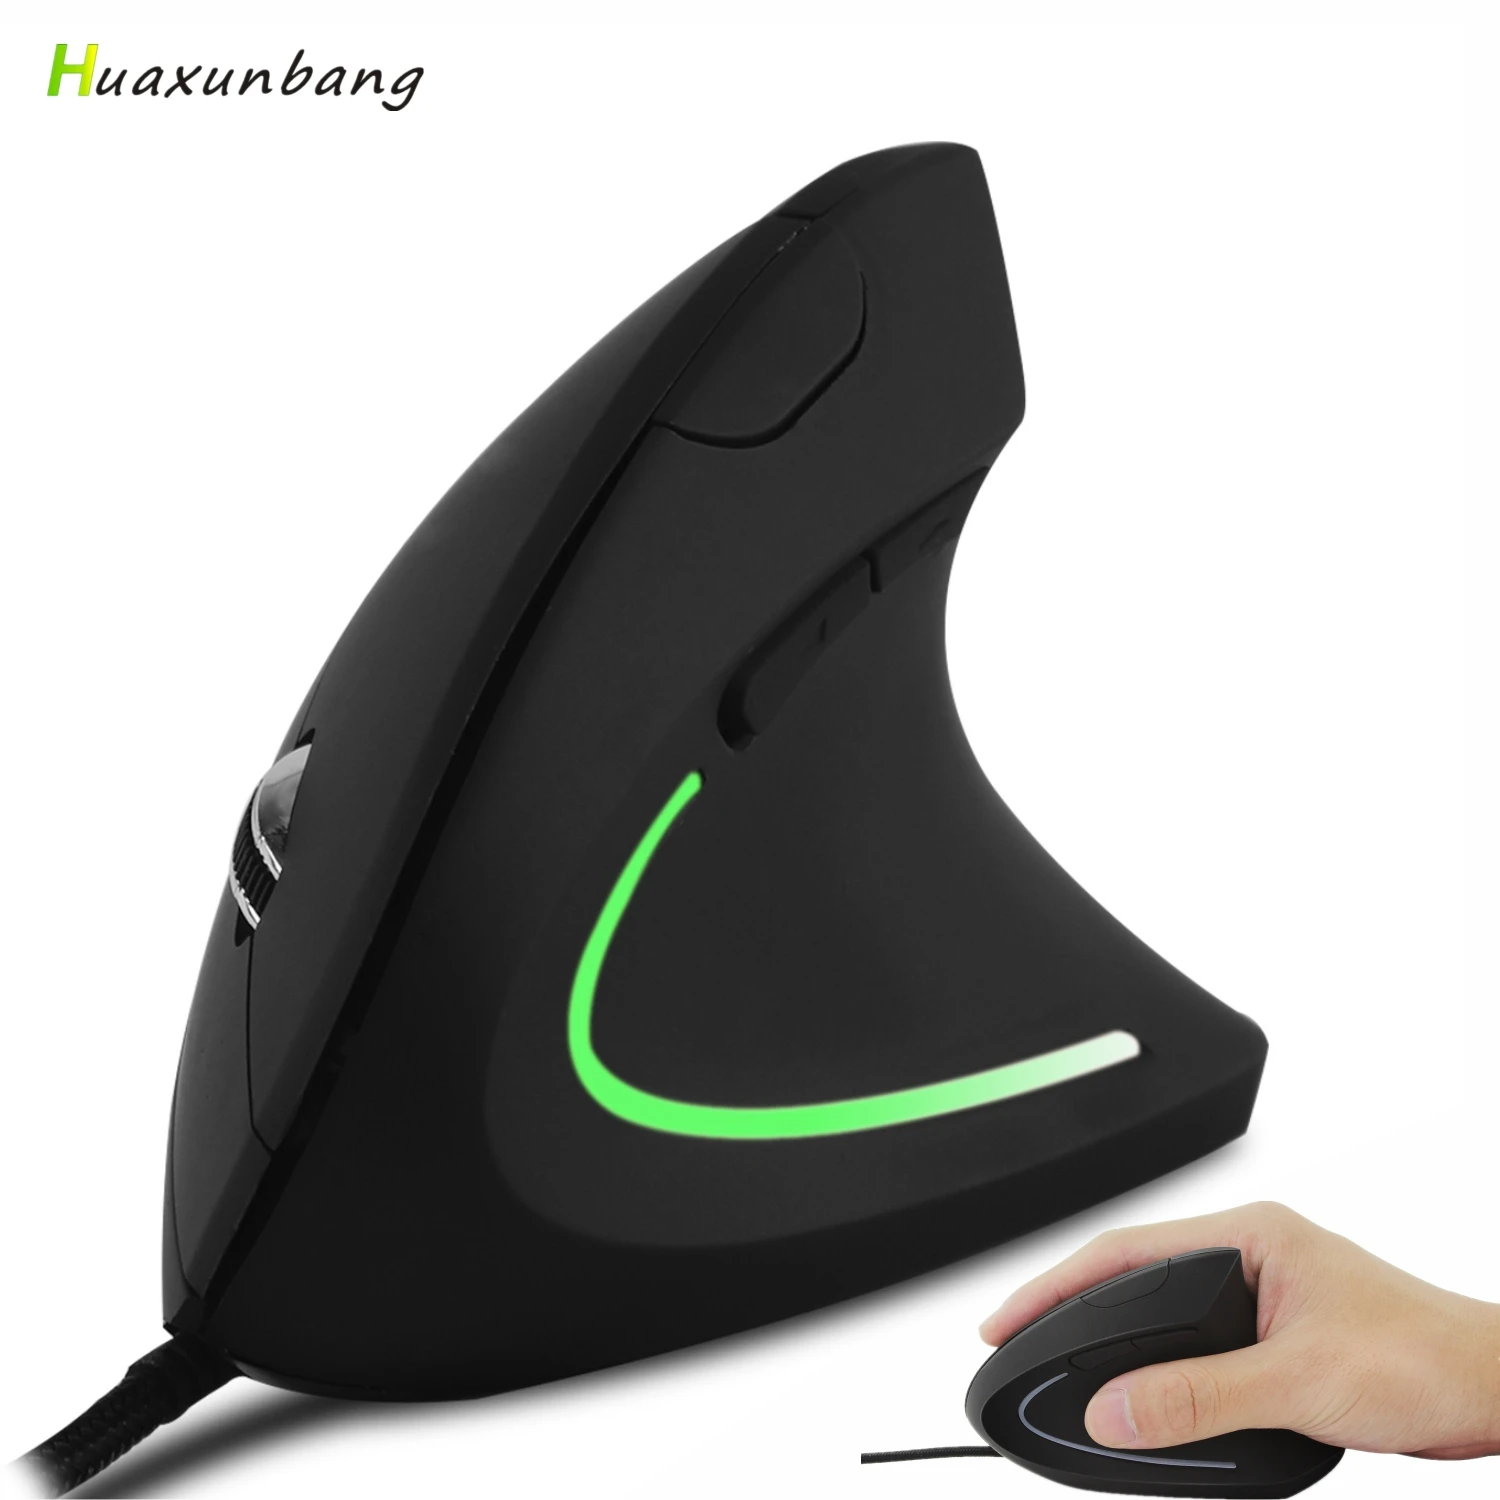 

Souris Gaming Mouse For Computer PC Vertical Ergonomic Gamer Mause For Laptop PS4 USB 3200 DPI 6 Button Optical Wired Game Mice